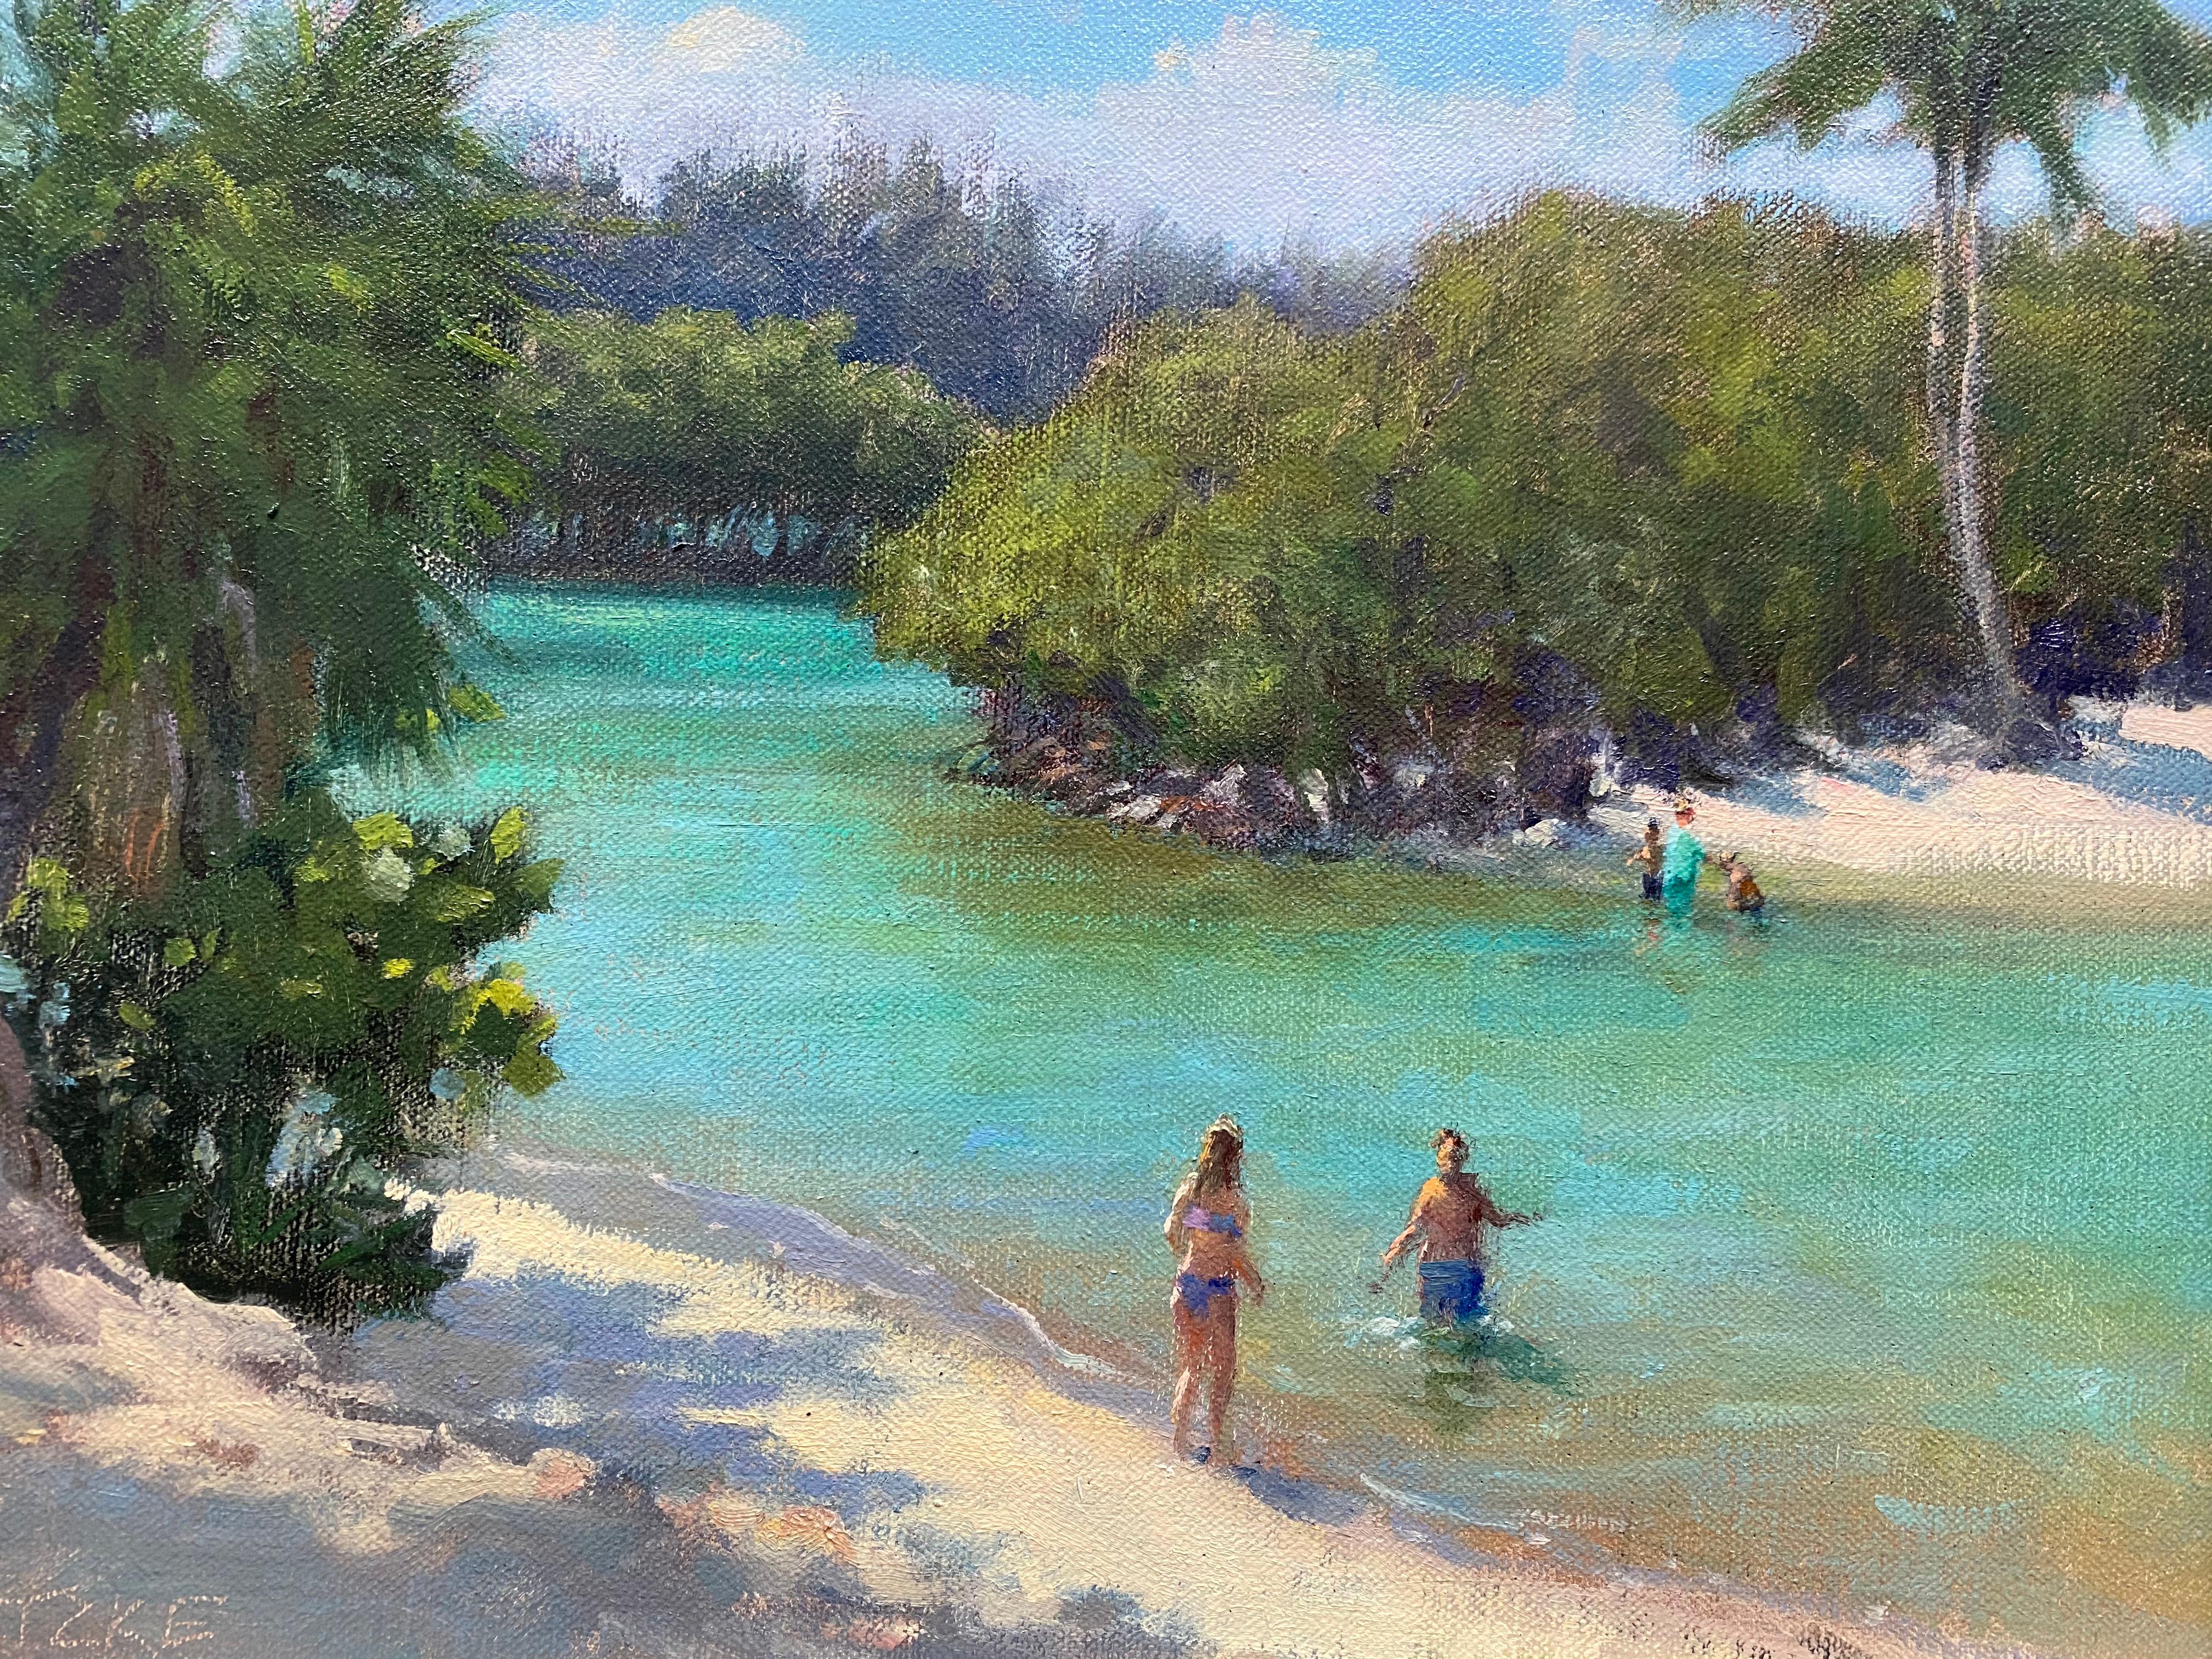 An oil painting of a tropical landscape. Crystal teal-blue water is surrounded by verdant bushes and palm trees, which cast dappled shadows onto the sand. A few figures splash around the shallow shoreline of the lagoon. 

Framed dimensions: 13.75 x